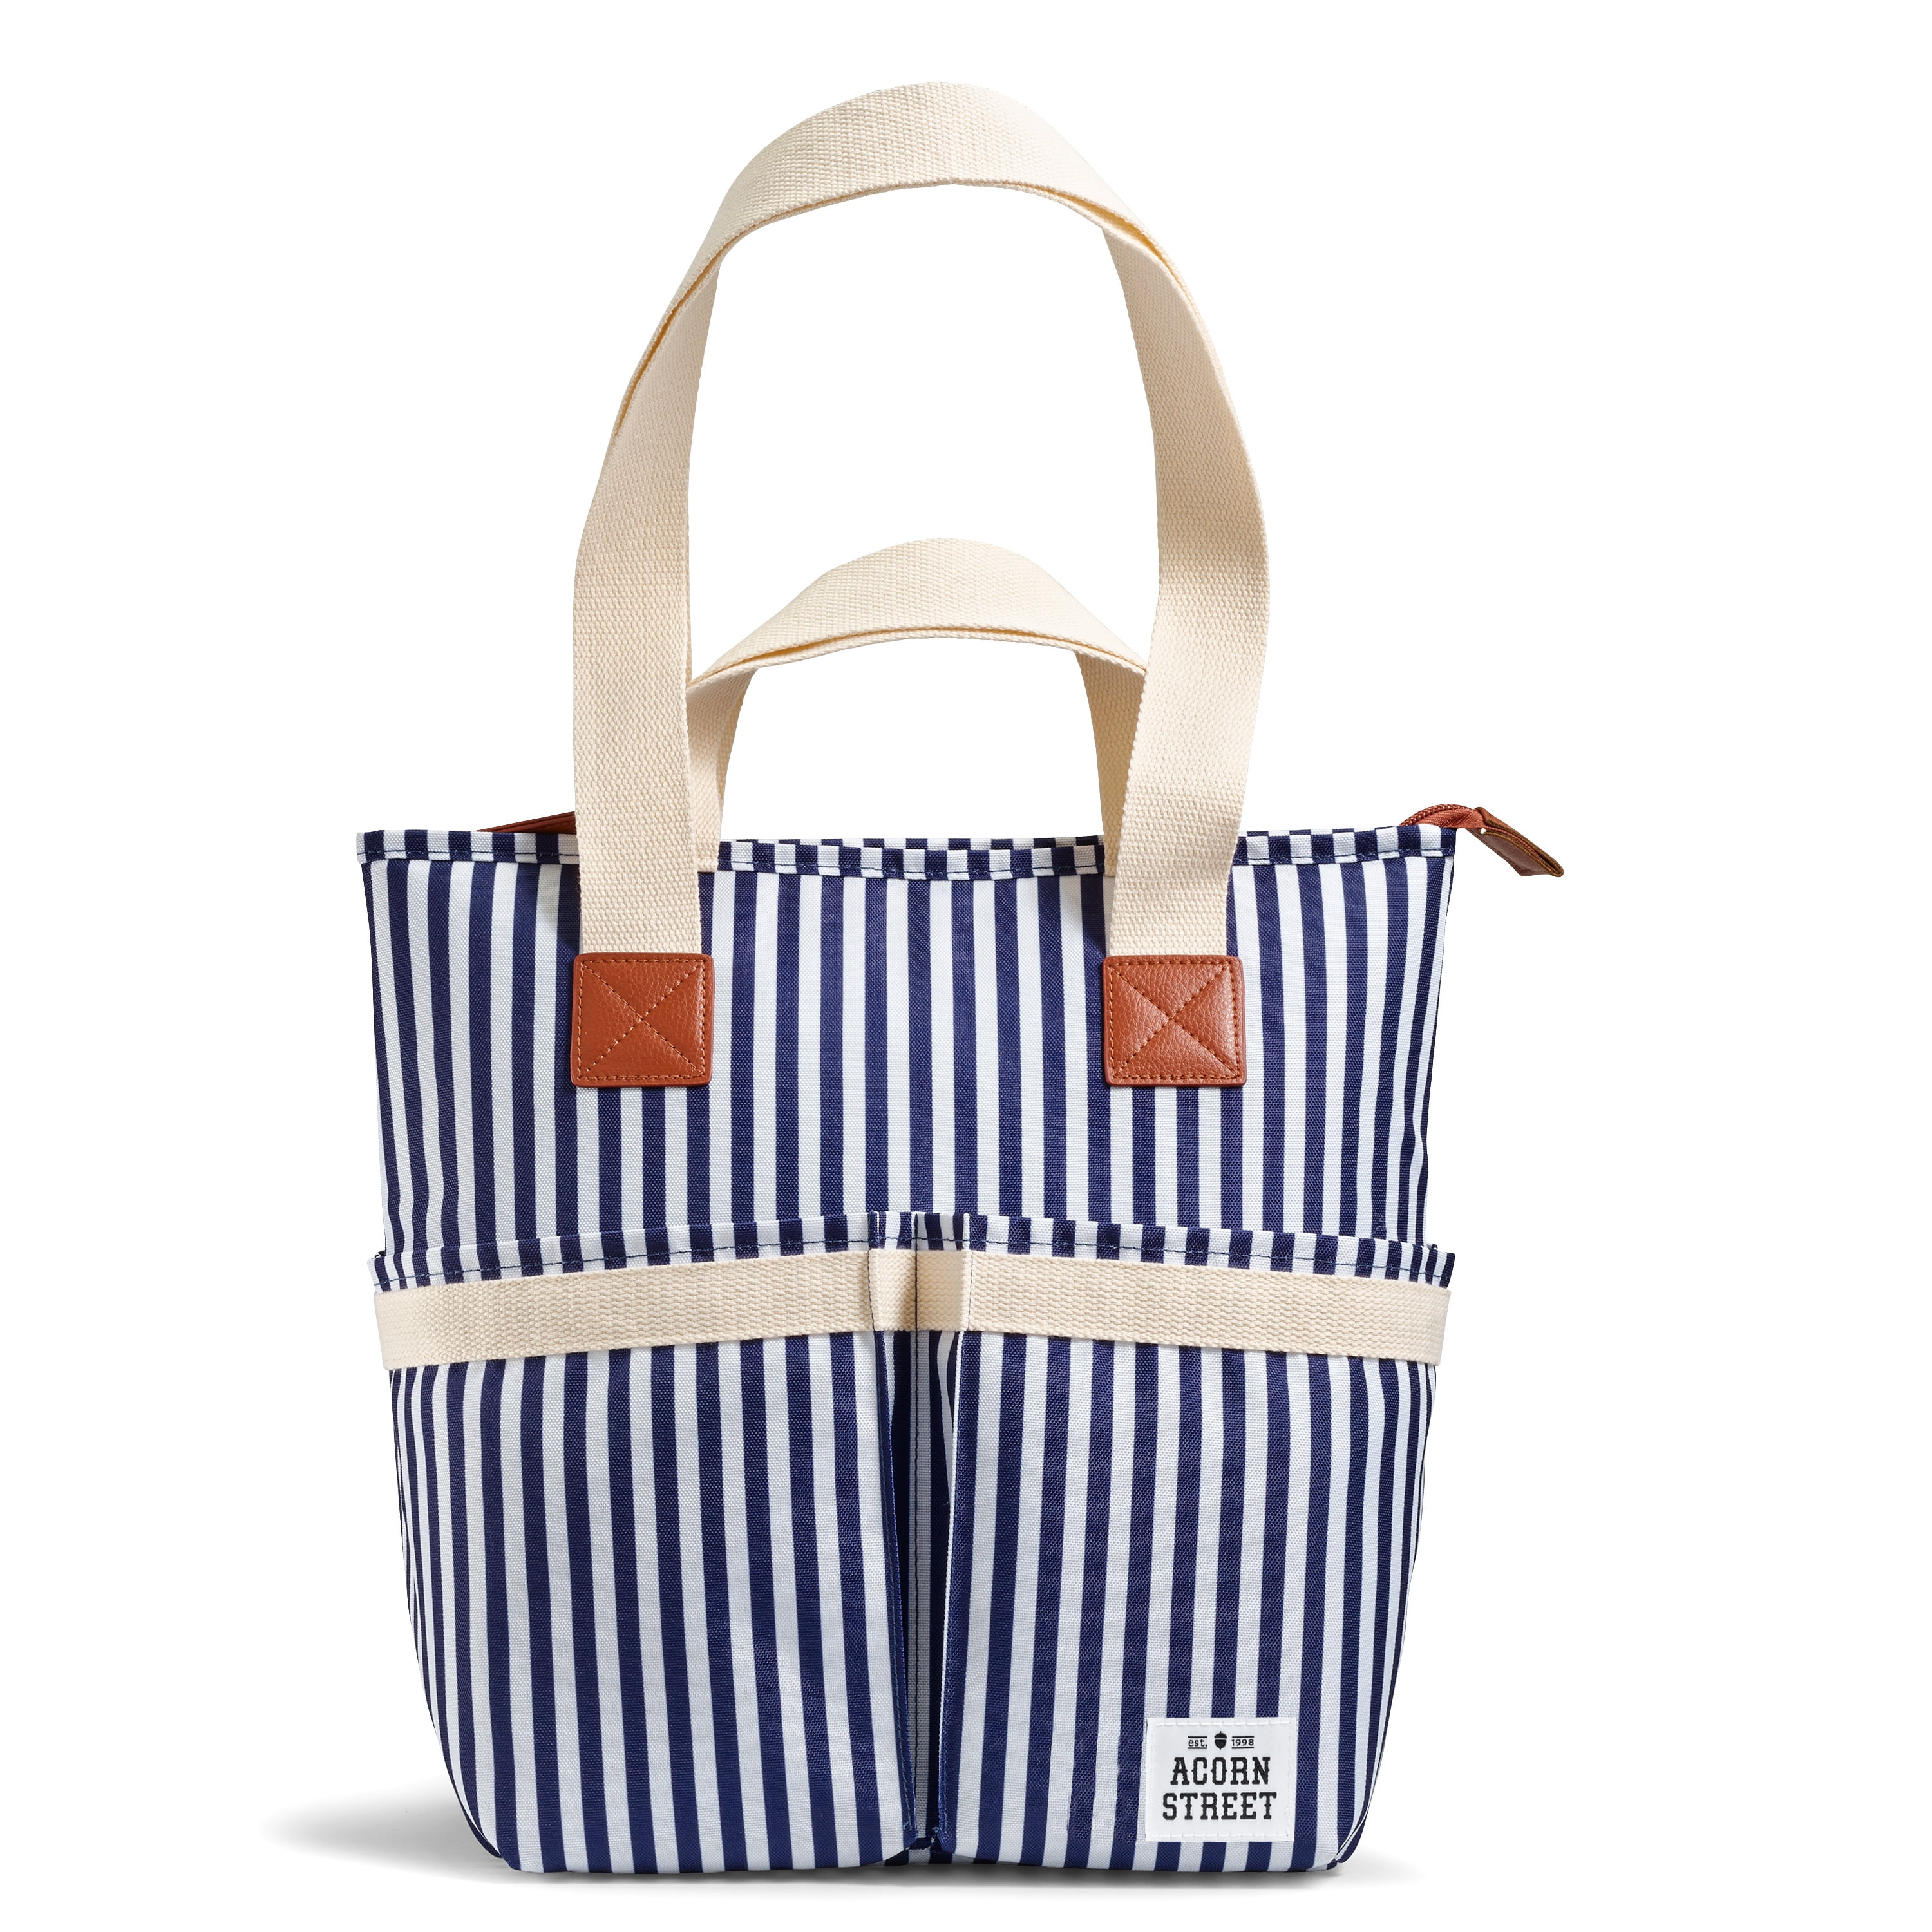 Acorn Street Insulated Cooler Tote Bag with Removable Divider, Navy Vineyard Stripe - Walmart.com